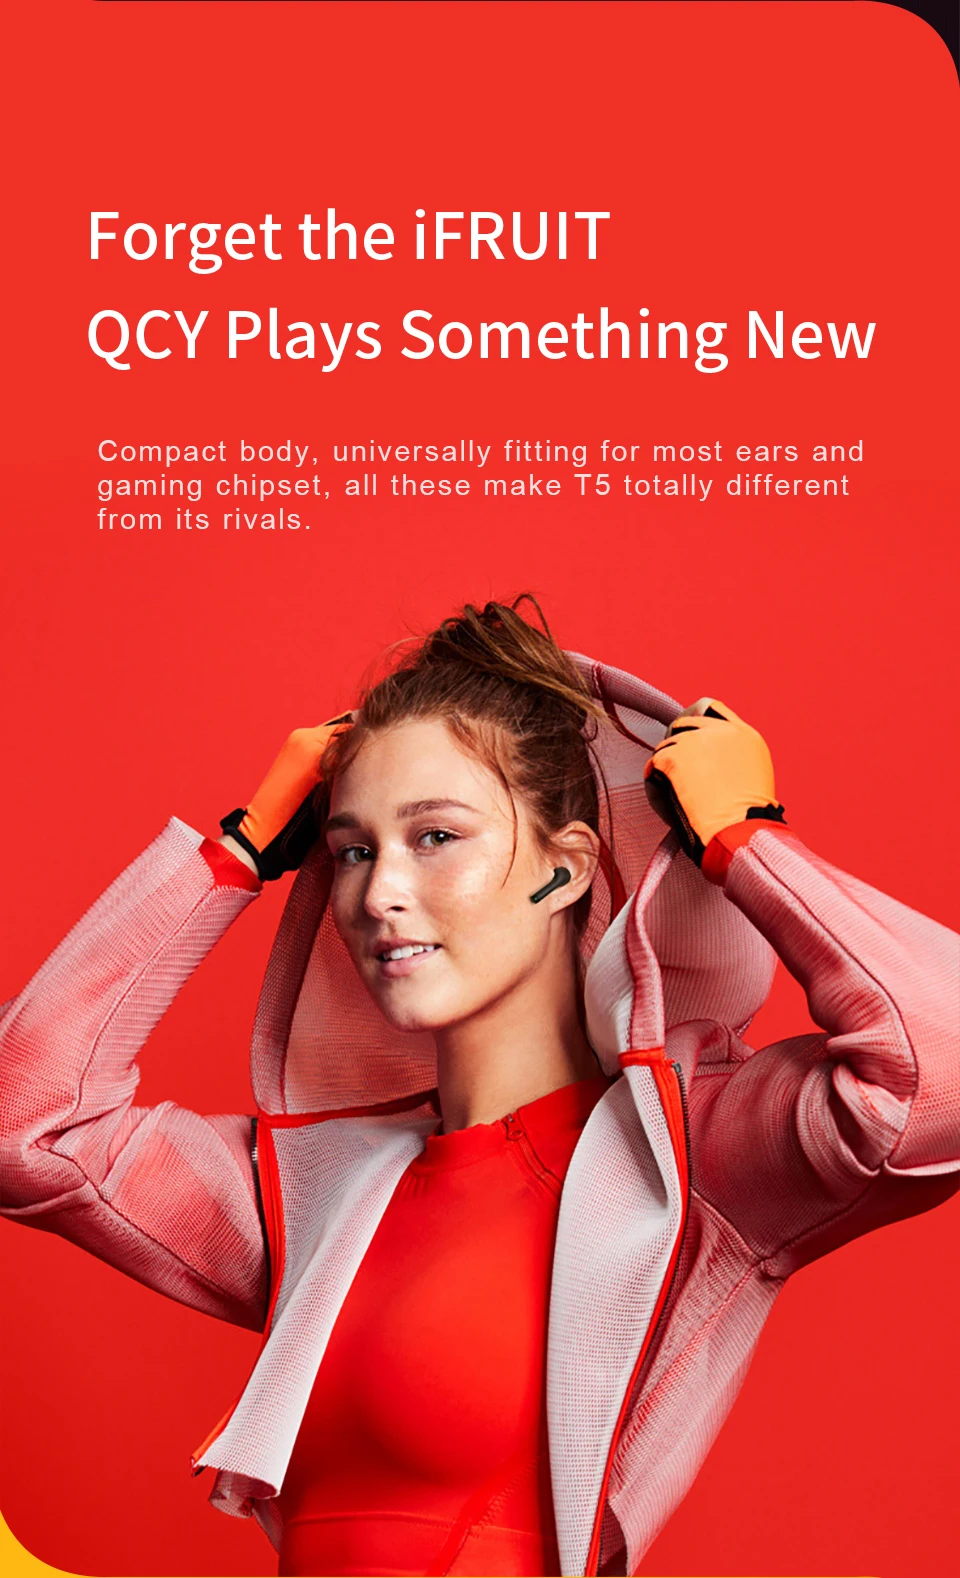 Qcy t5 wireless bluetooth earphones v5.0 touch control stereo hd talking with 380mah battery (qcy-t5-black)